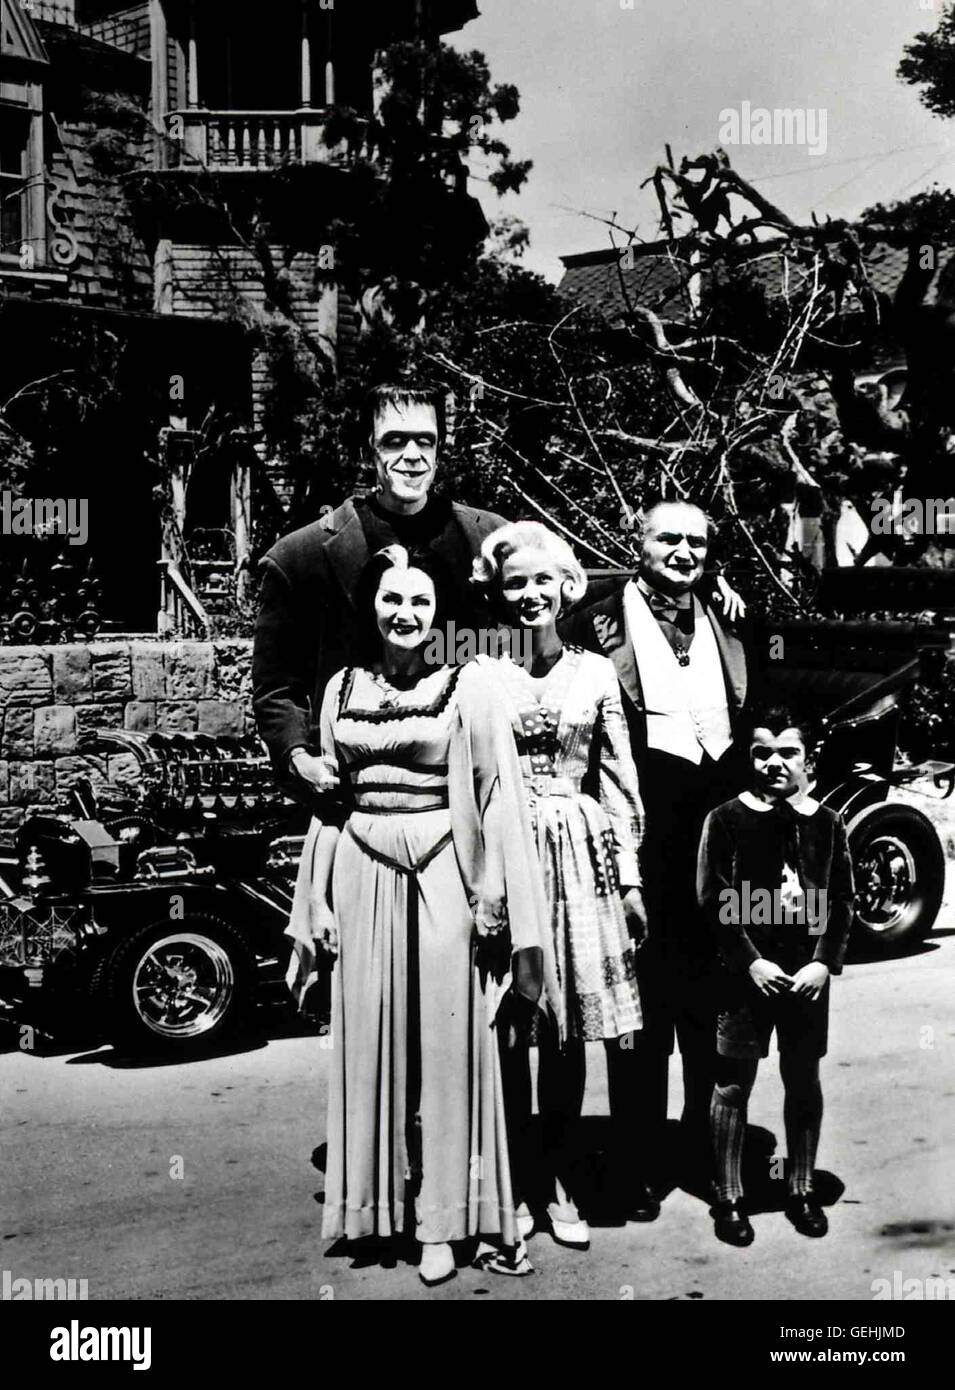 Herman Munster (Fred Gwynne), Lily Munster (Yvonne de Carlo), Marilyn Munster (Beverly Owen), Opa Munster (Al Lewis), Eddie Munster (Butch Patrick) *** Local Caption *** 1964, Munsters, The, The Munsters Stock Photo